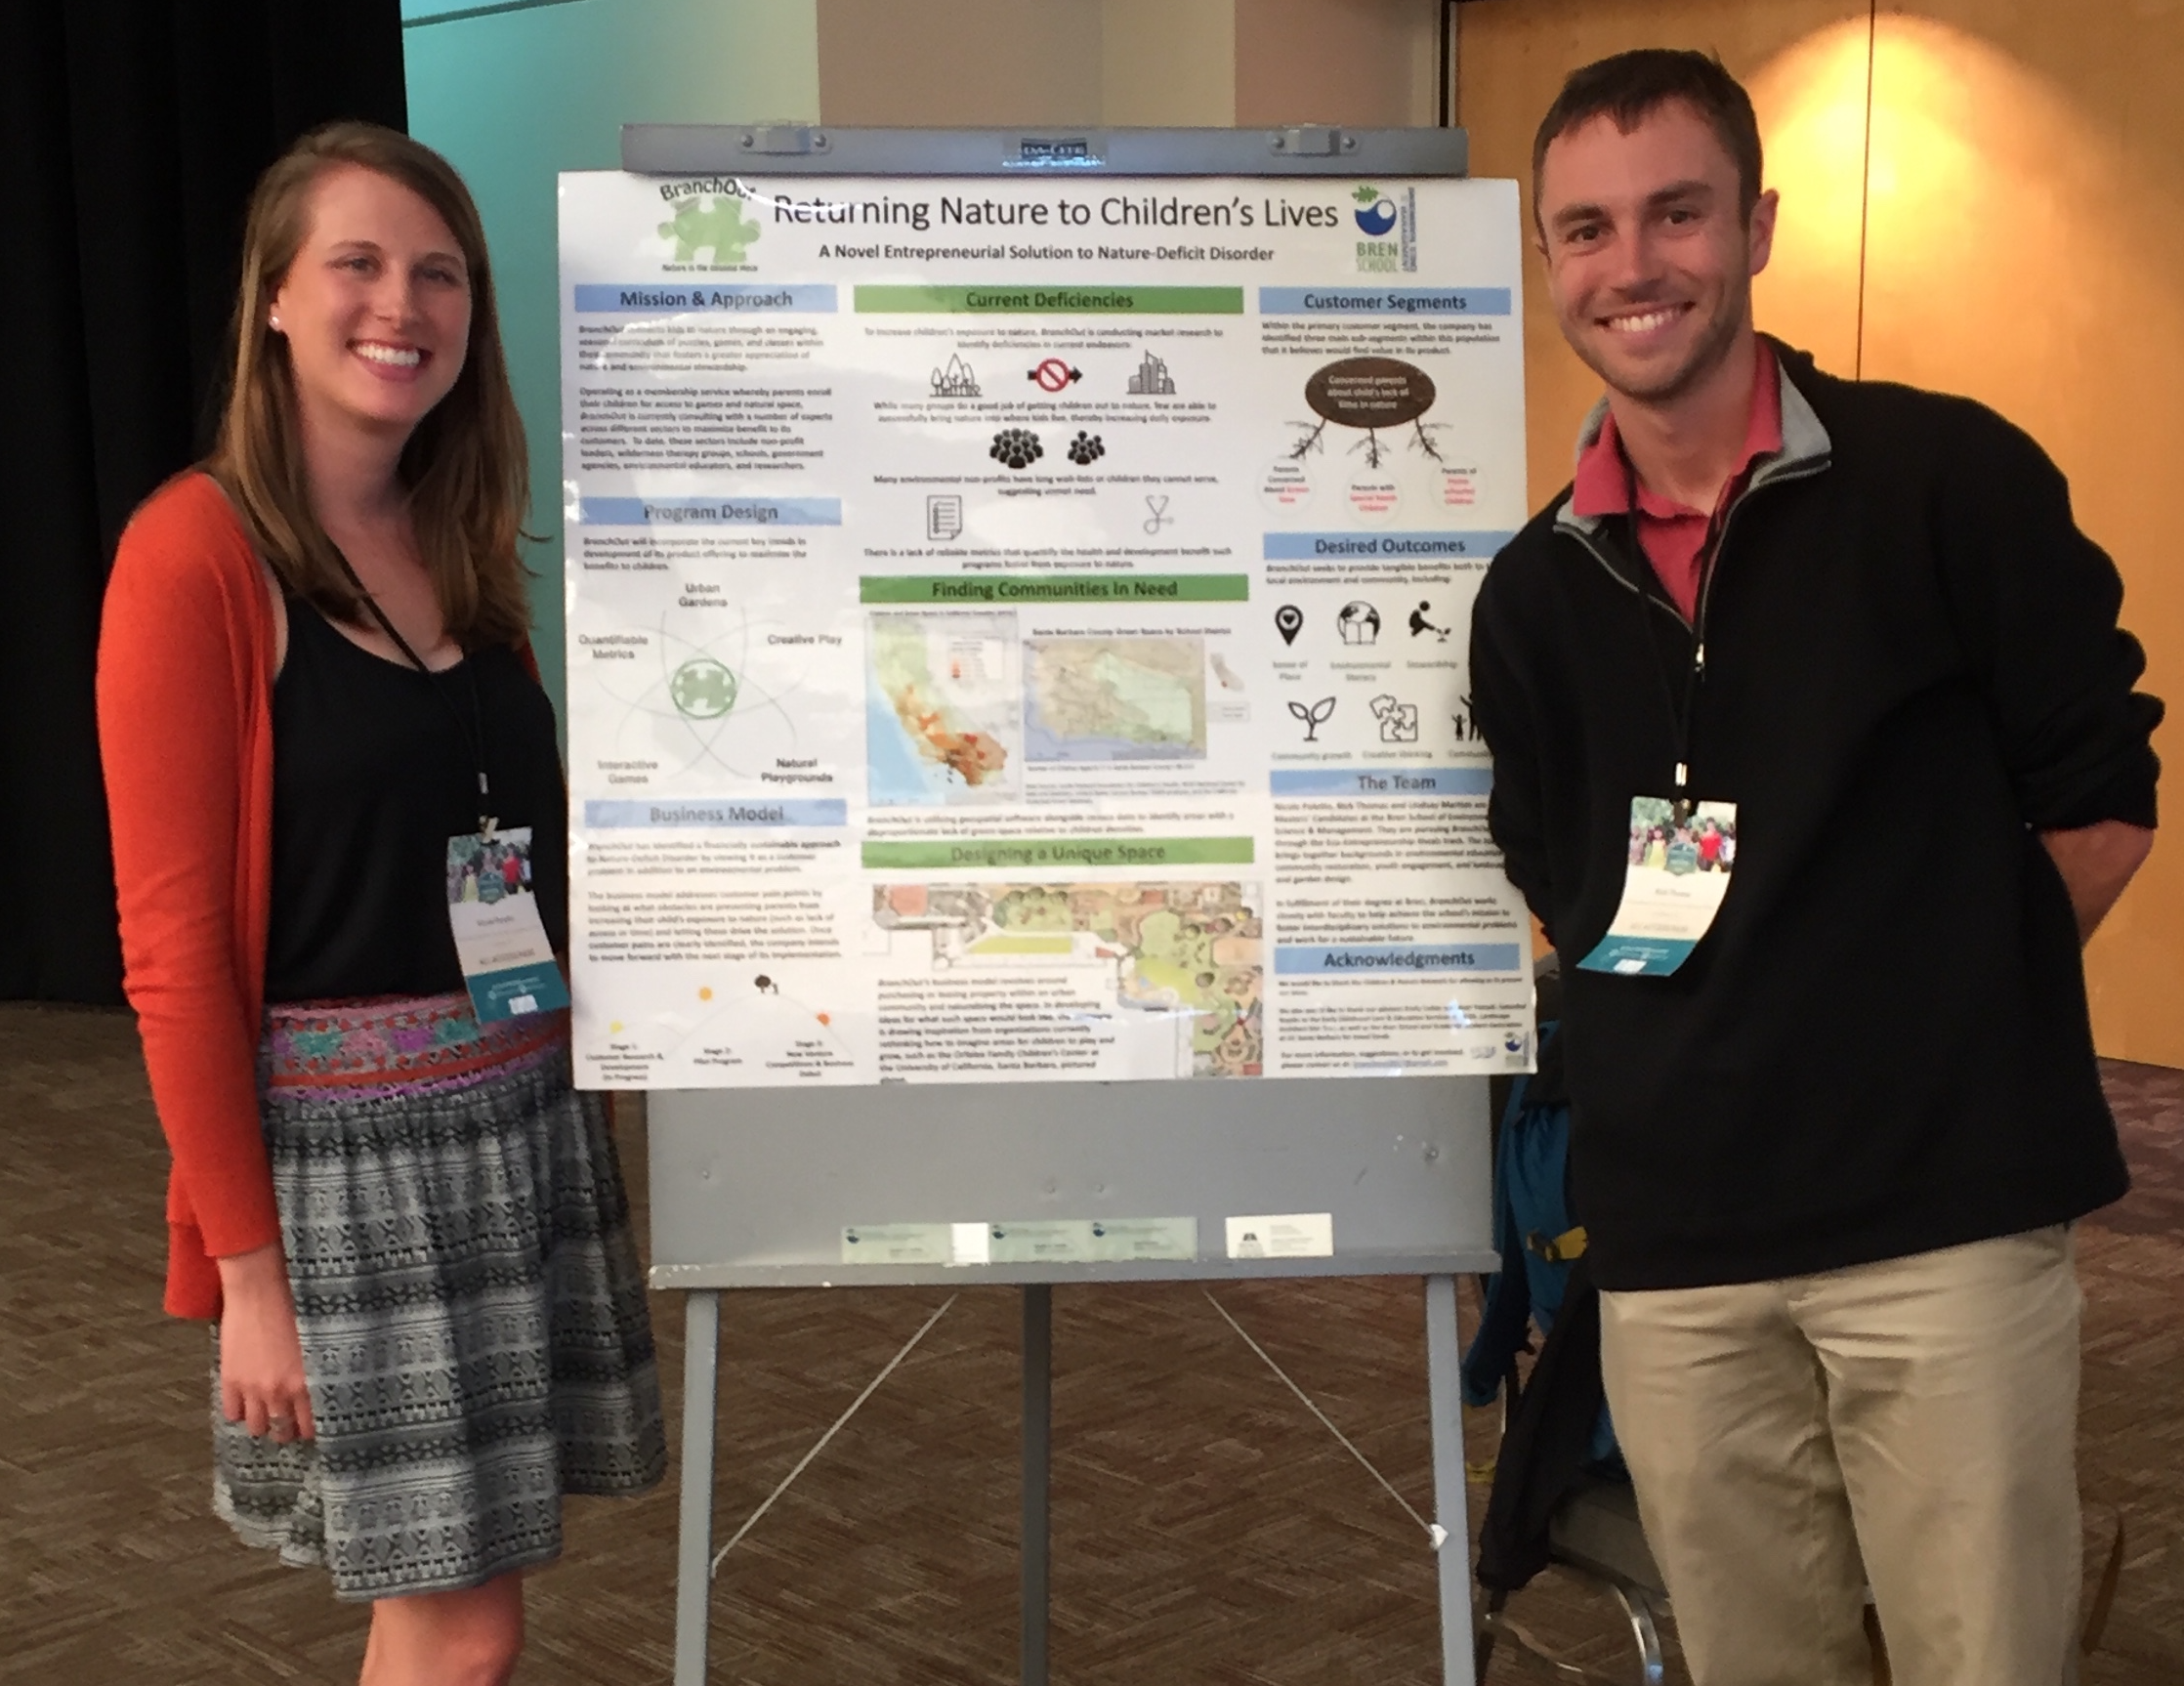 Nicole Poletto and fellow BranchOut thesis group member Rick Thomas presenting their ideas on a novel approach to nature-deficit disorder solutions in St. Paul, MN.